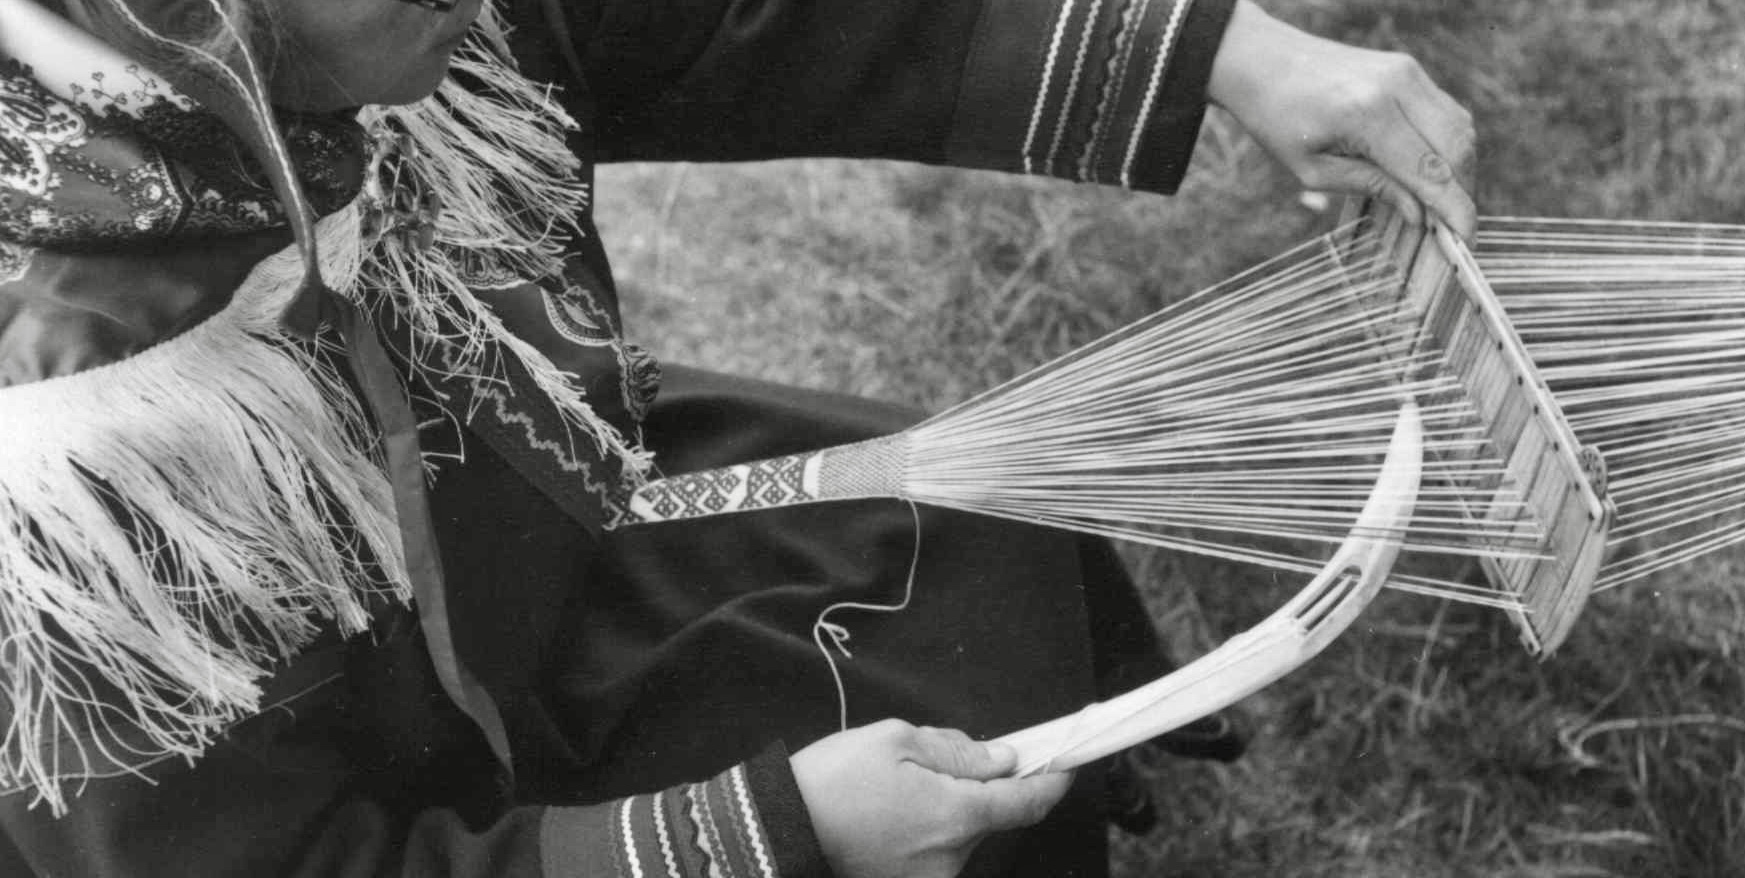 Teacher and pioneer of Sàmi education rights Edel Hætta Eriksen weaving using a reindeer horn heddle and shuttle. 1956 Photo Unni Fürst, Norsk Folkemuseum CC BY-SA